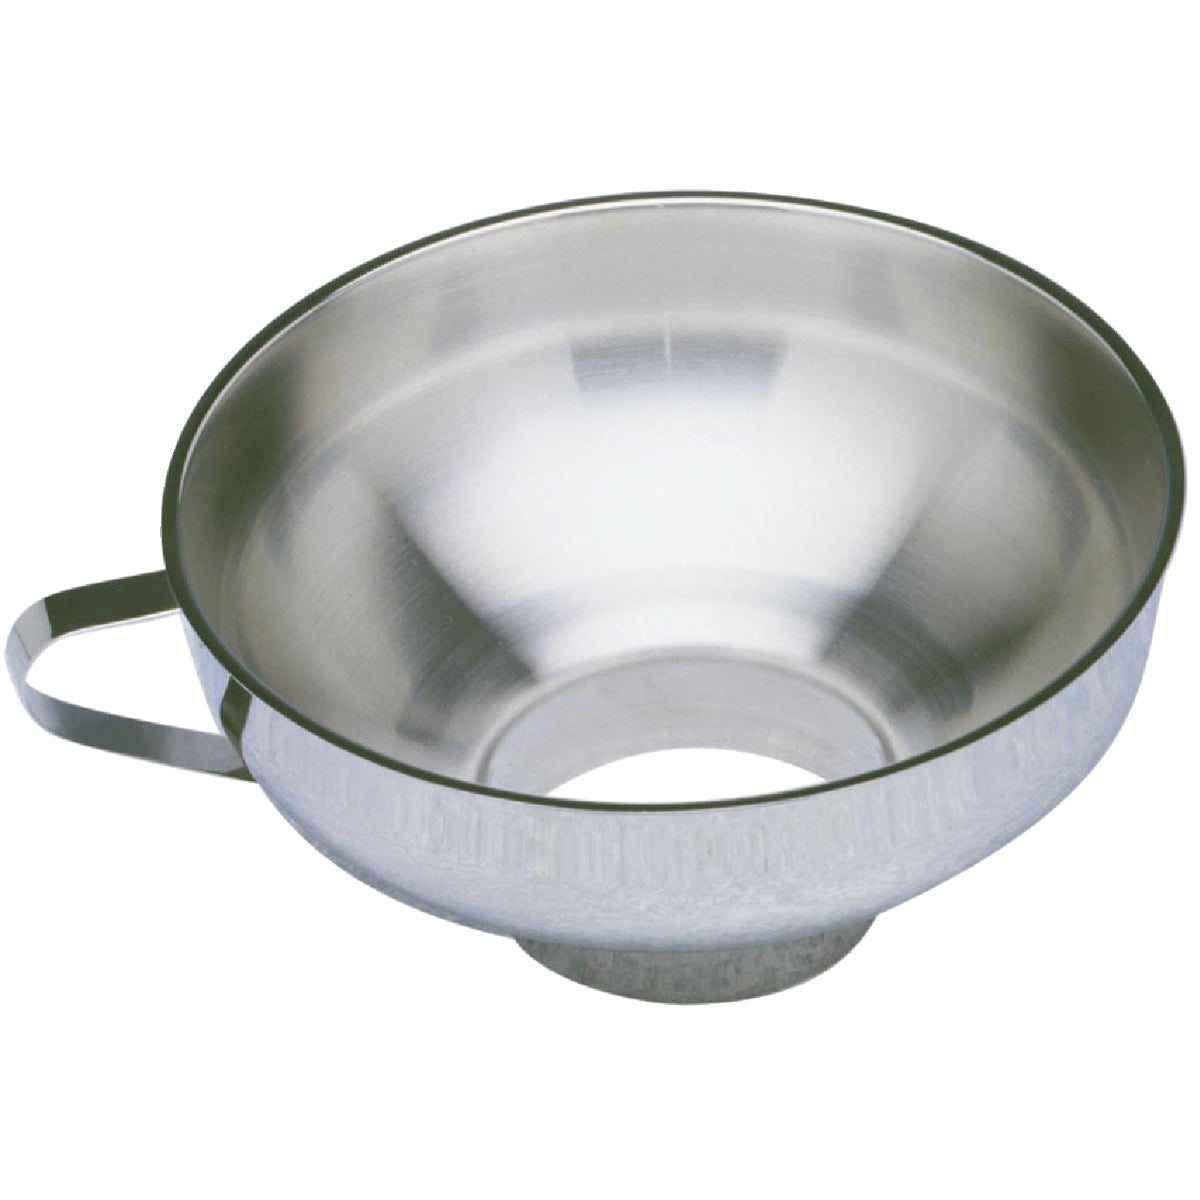 Item 600064, This high quality stainless steel funnel can transfer both liquids and 